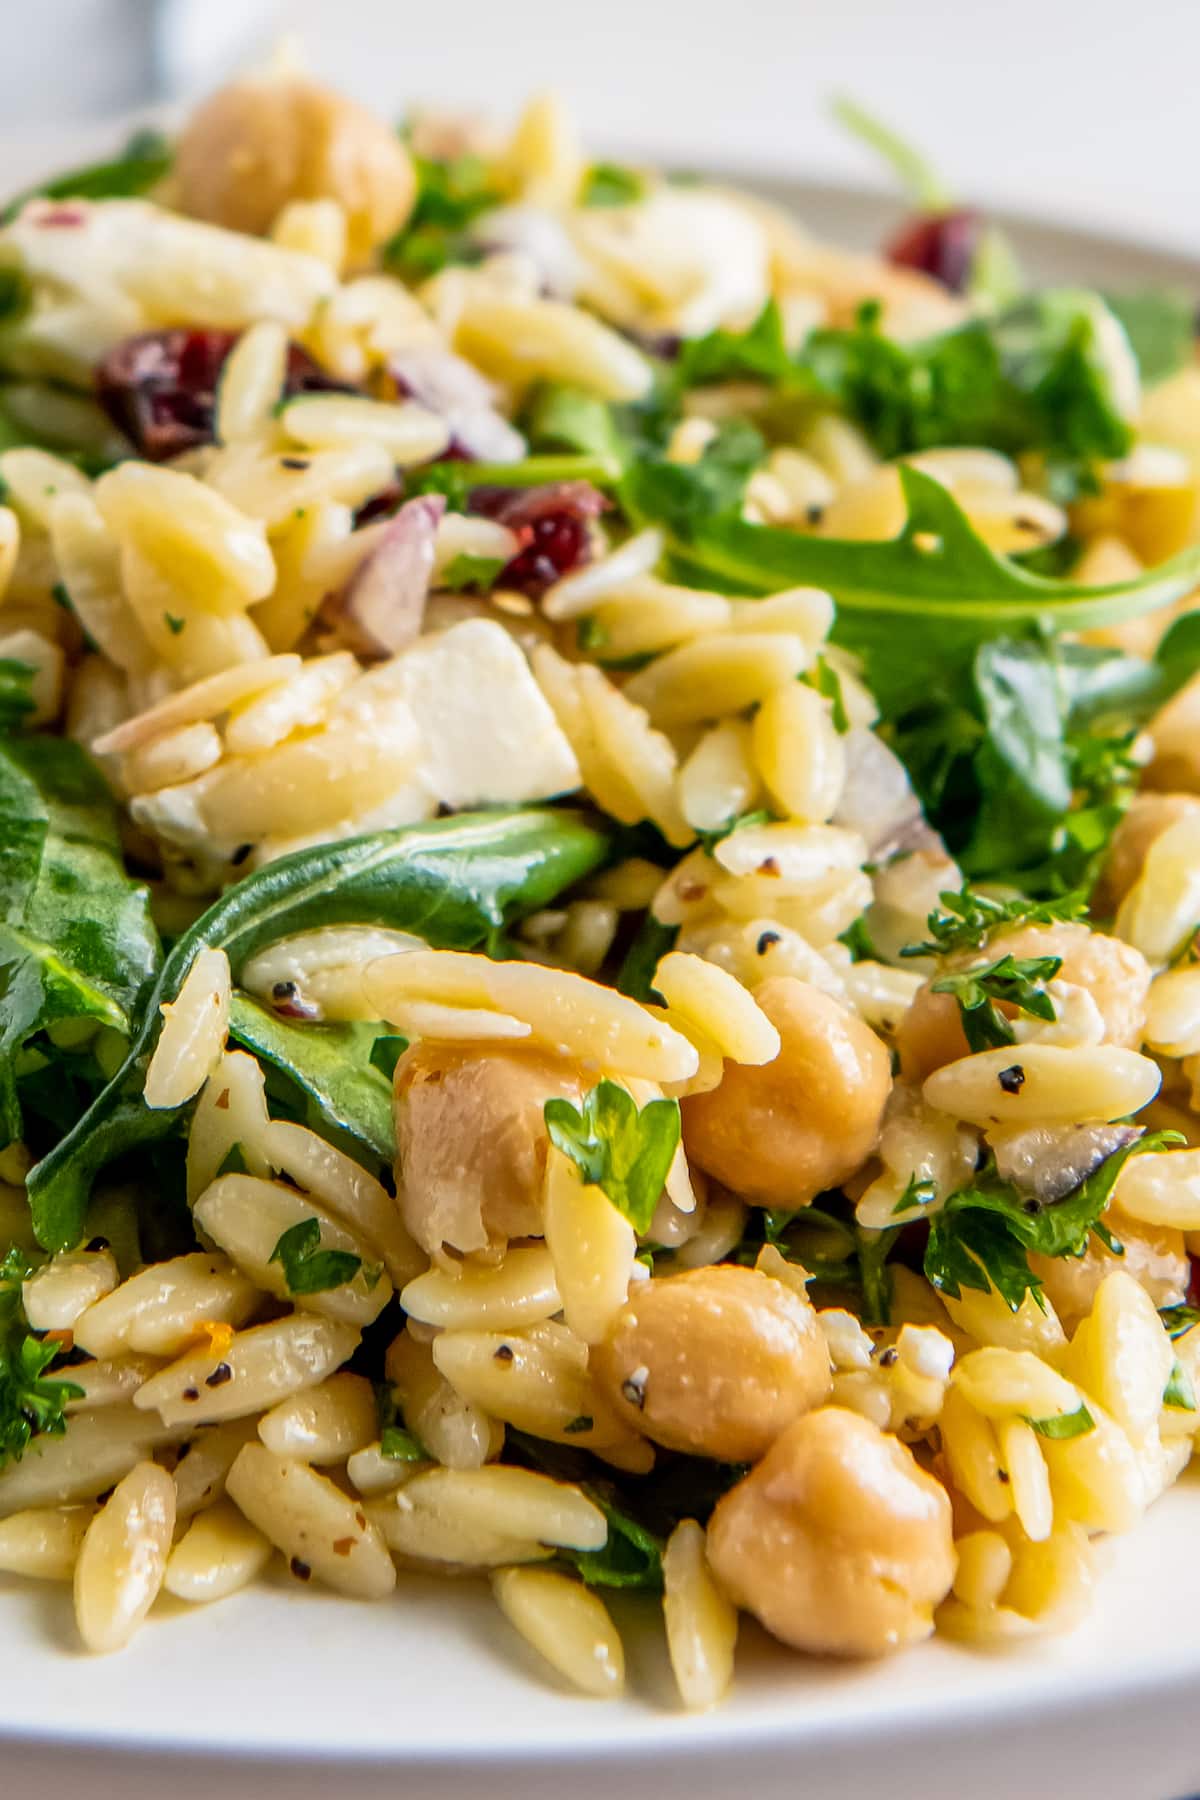 Orzo Salad with Arugula, red onions, feta, and herbs